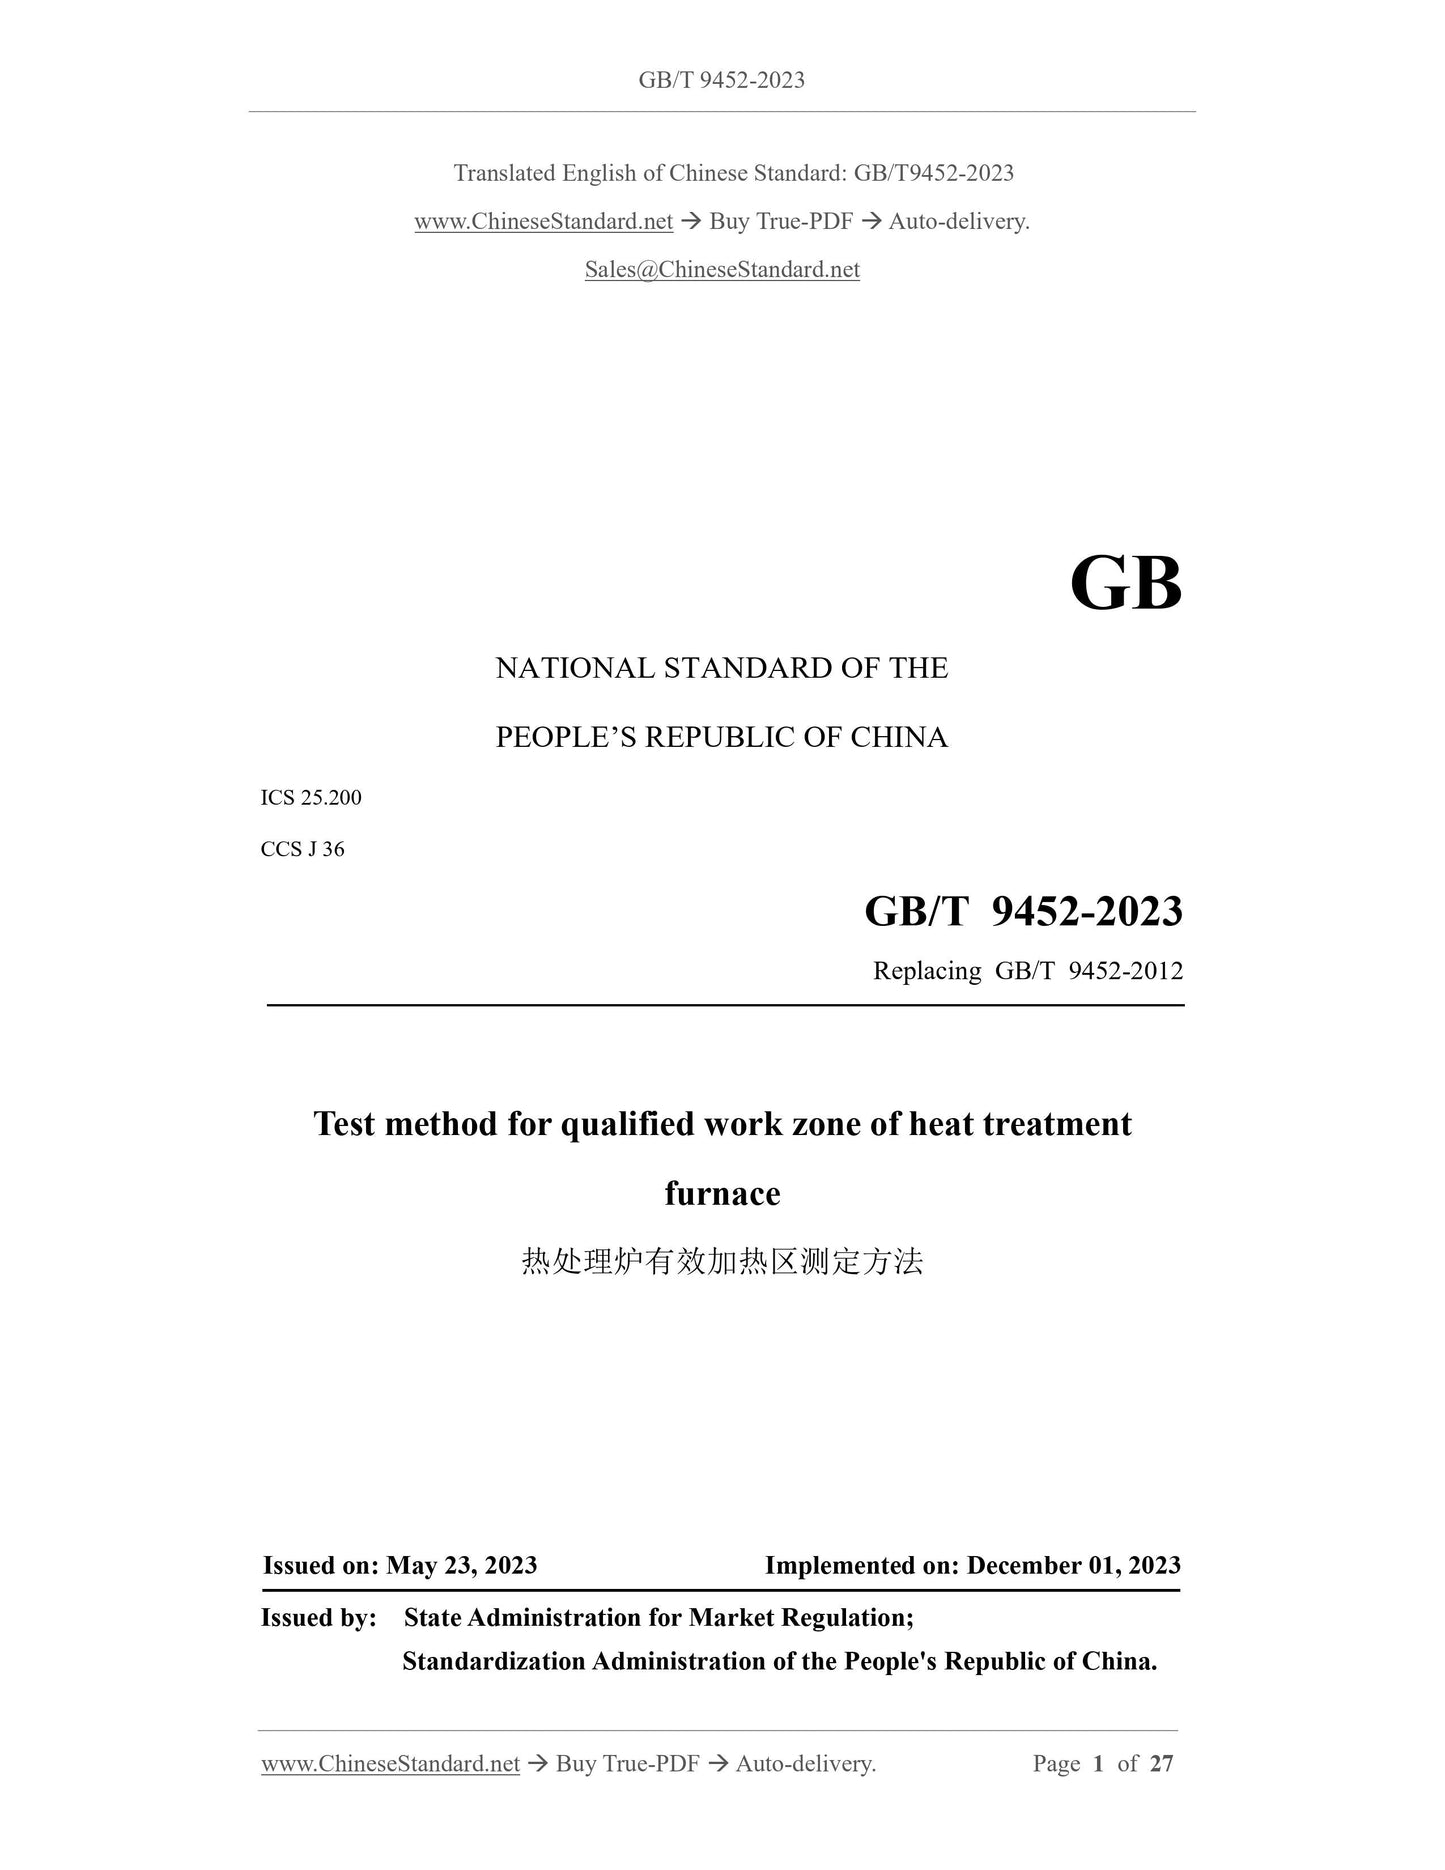 GB/T 9452-2023 Page 1